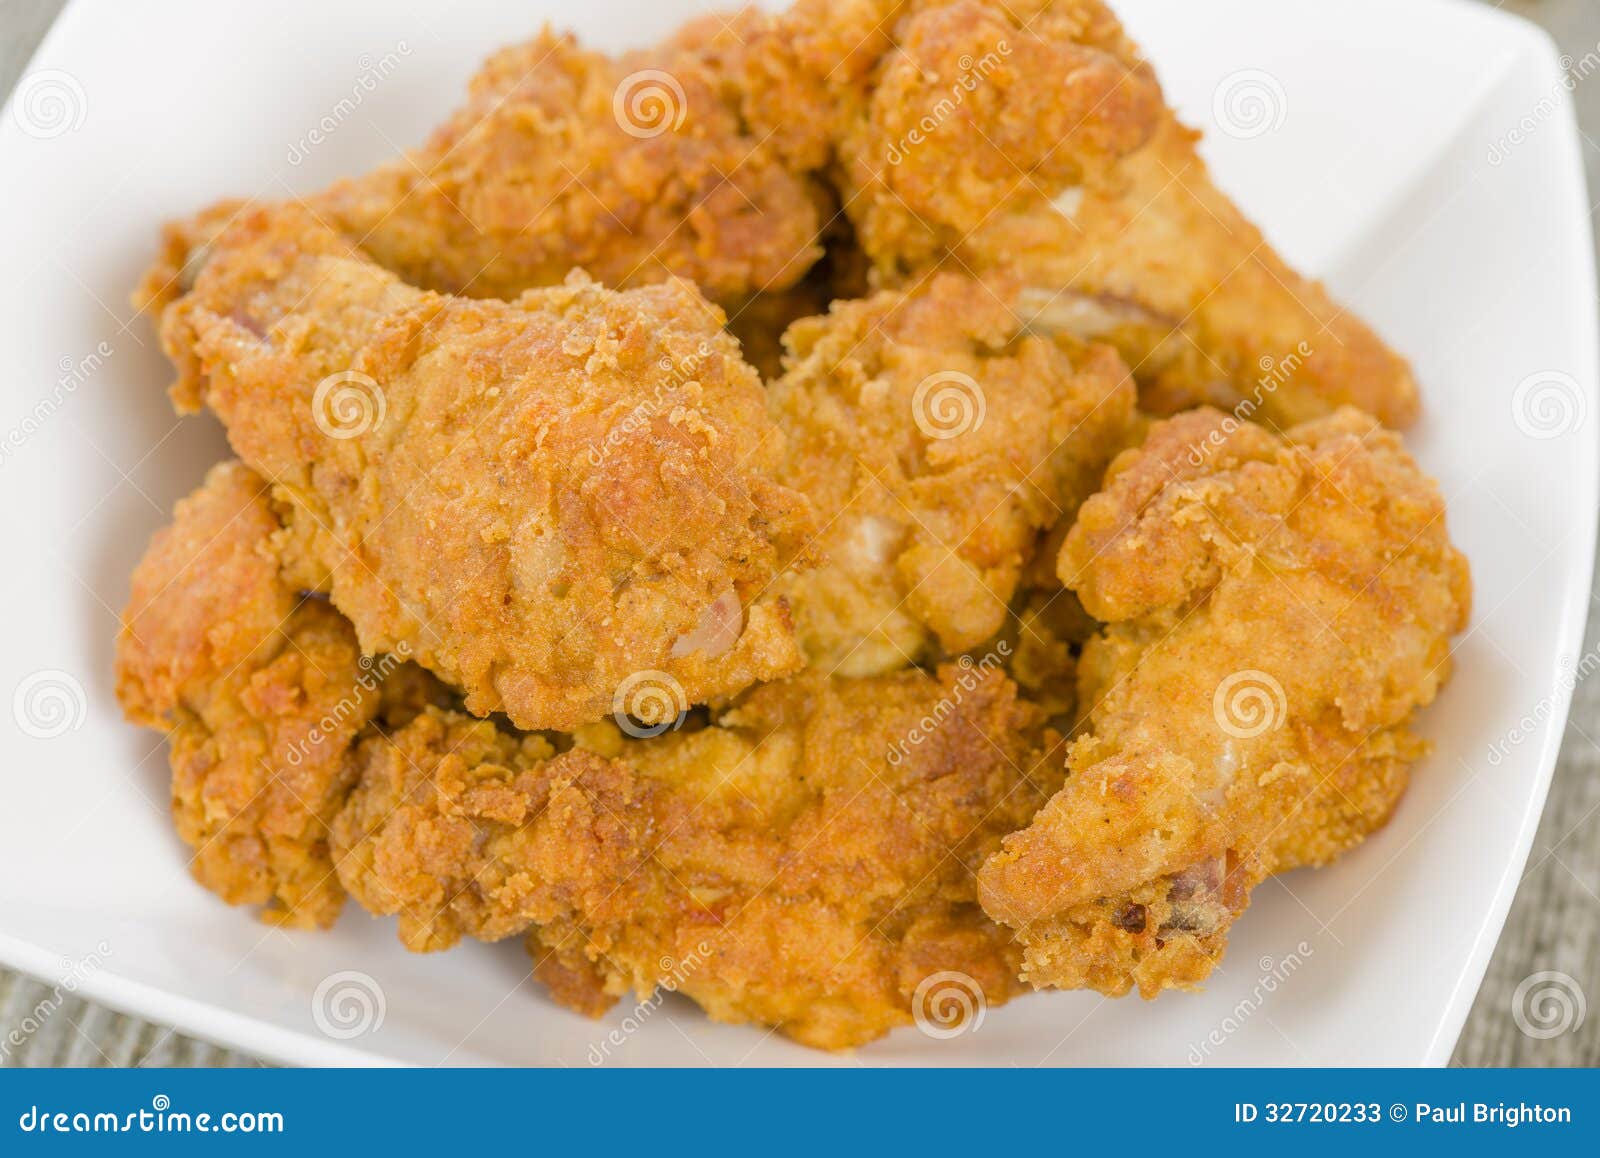 Fried Hot Chicken Wings stock image. Image of meat, coated - 32720233